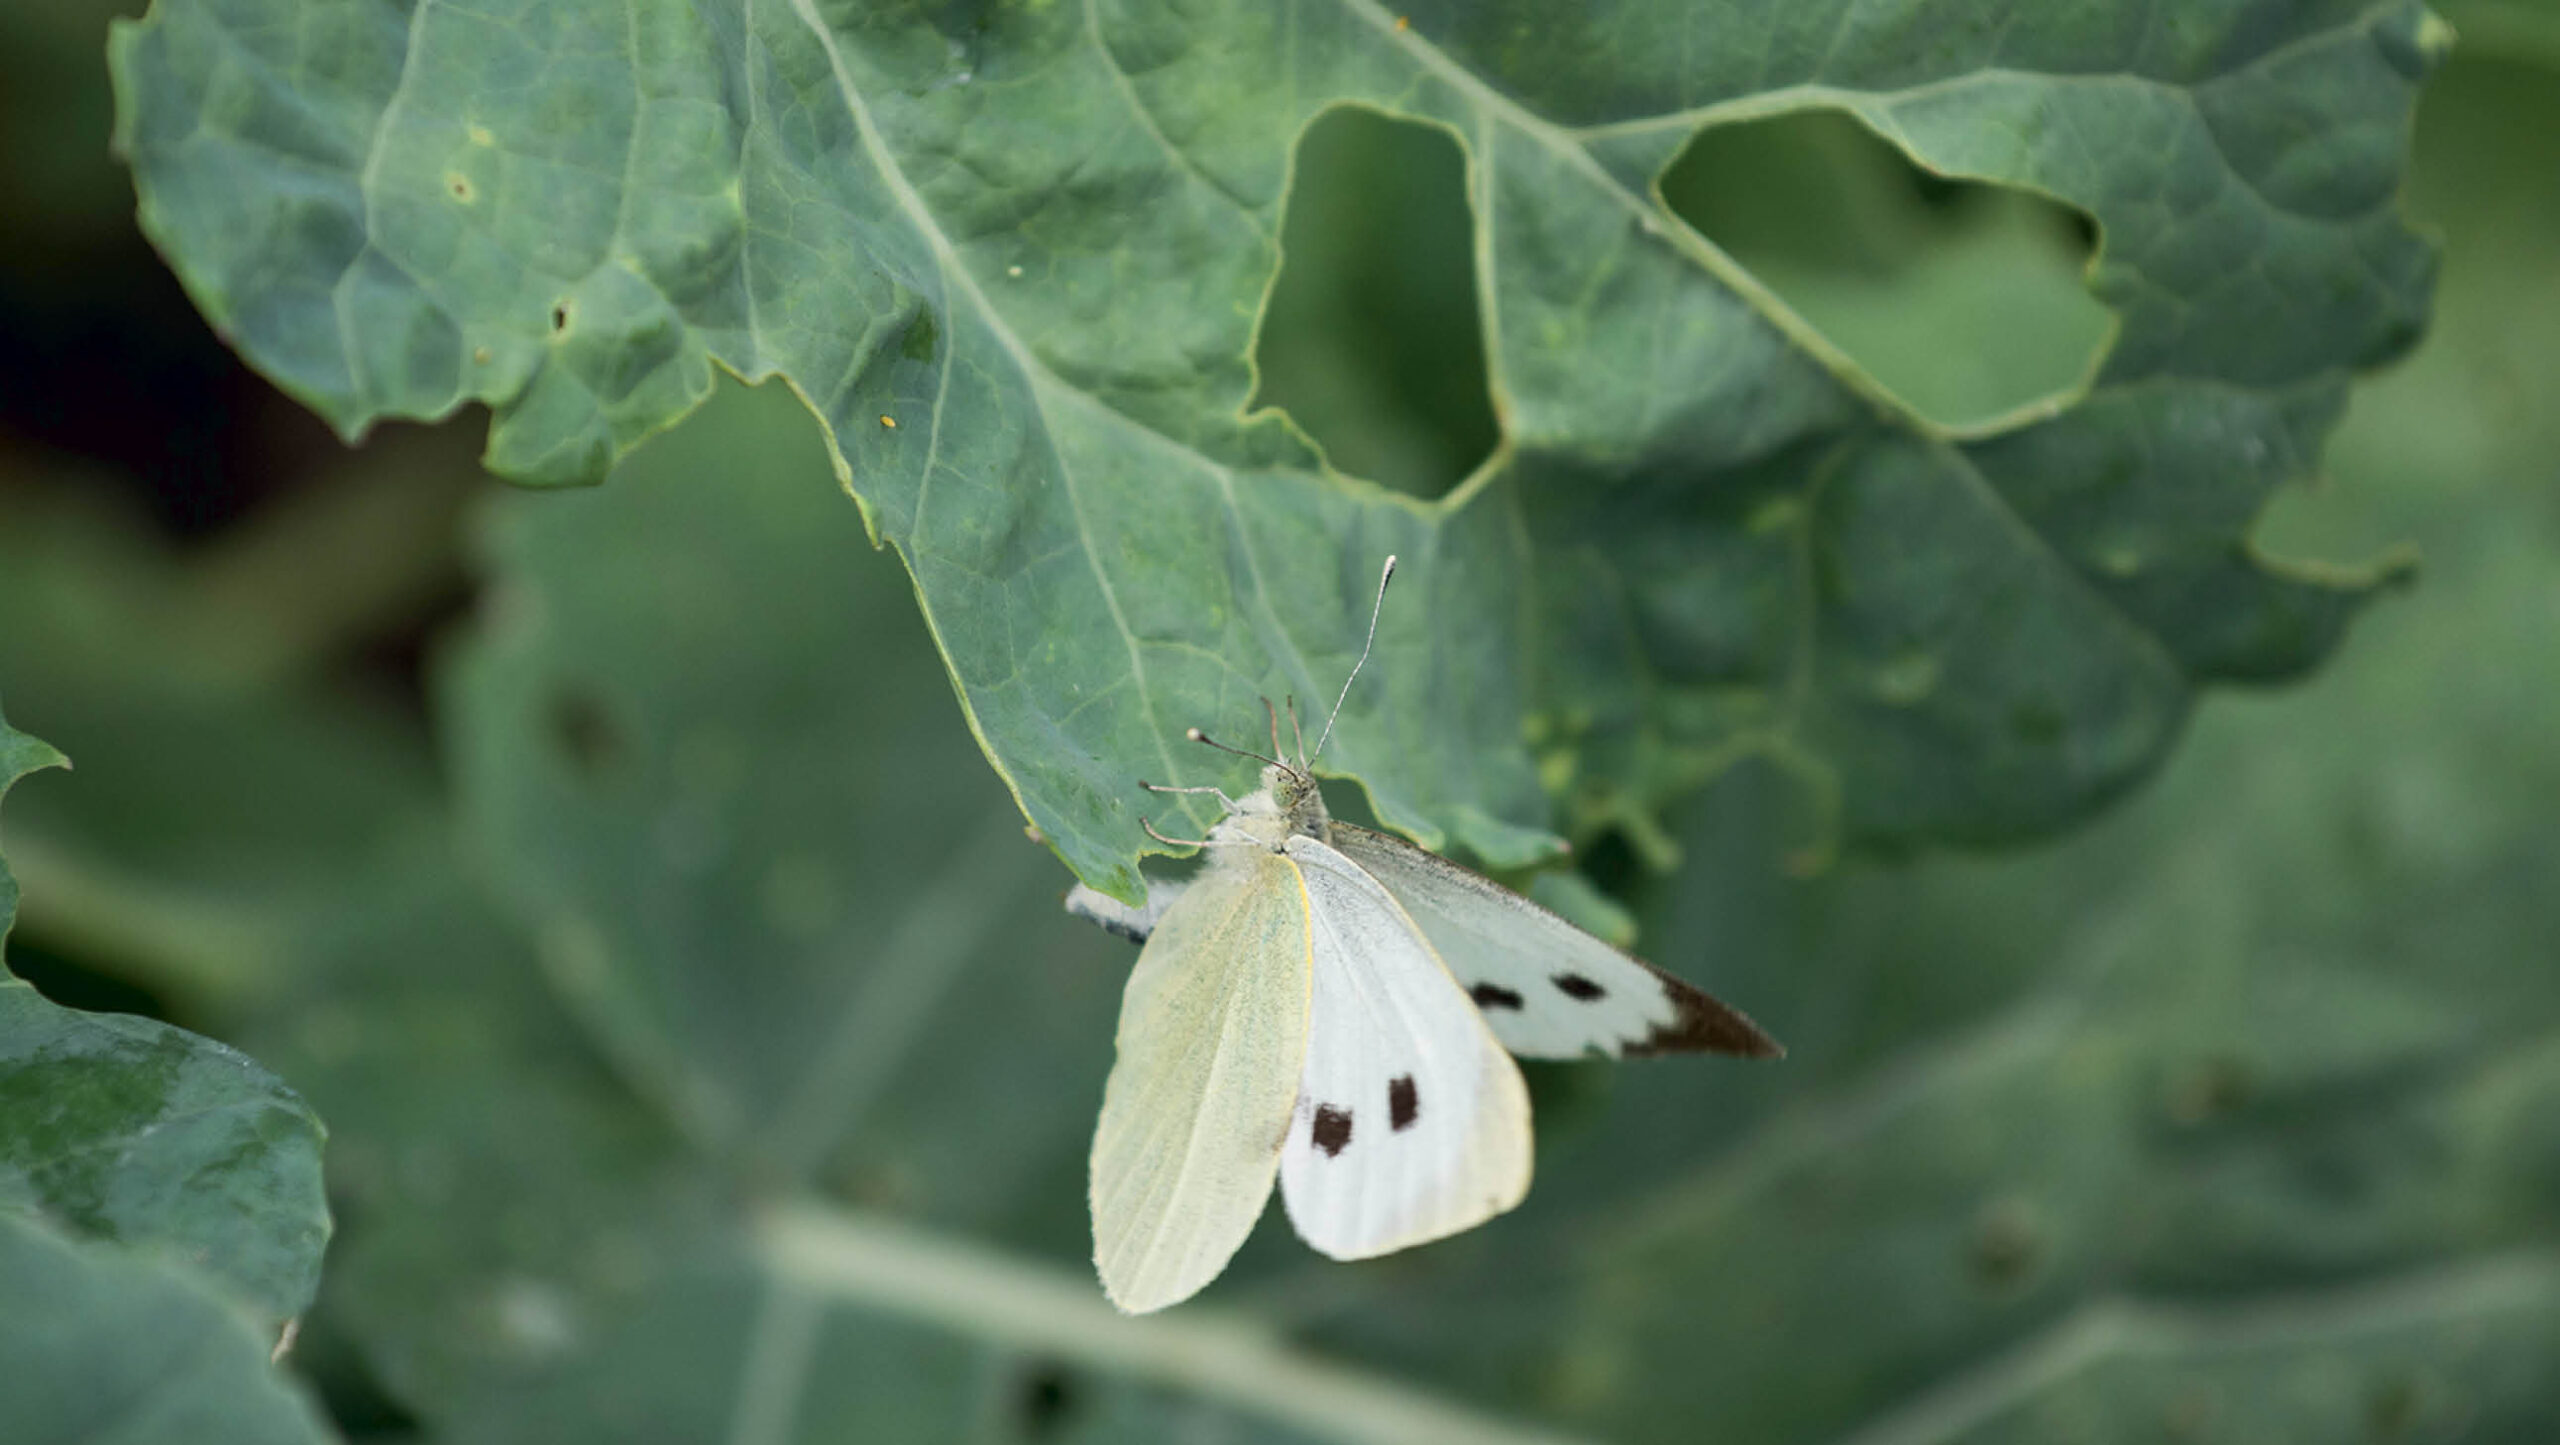 The cabbage white butterfly.